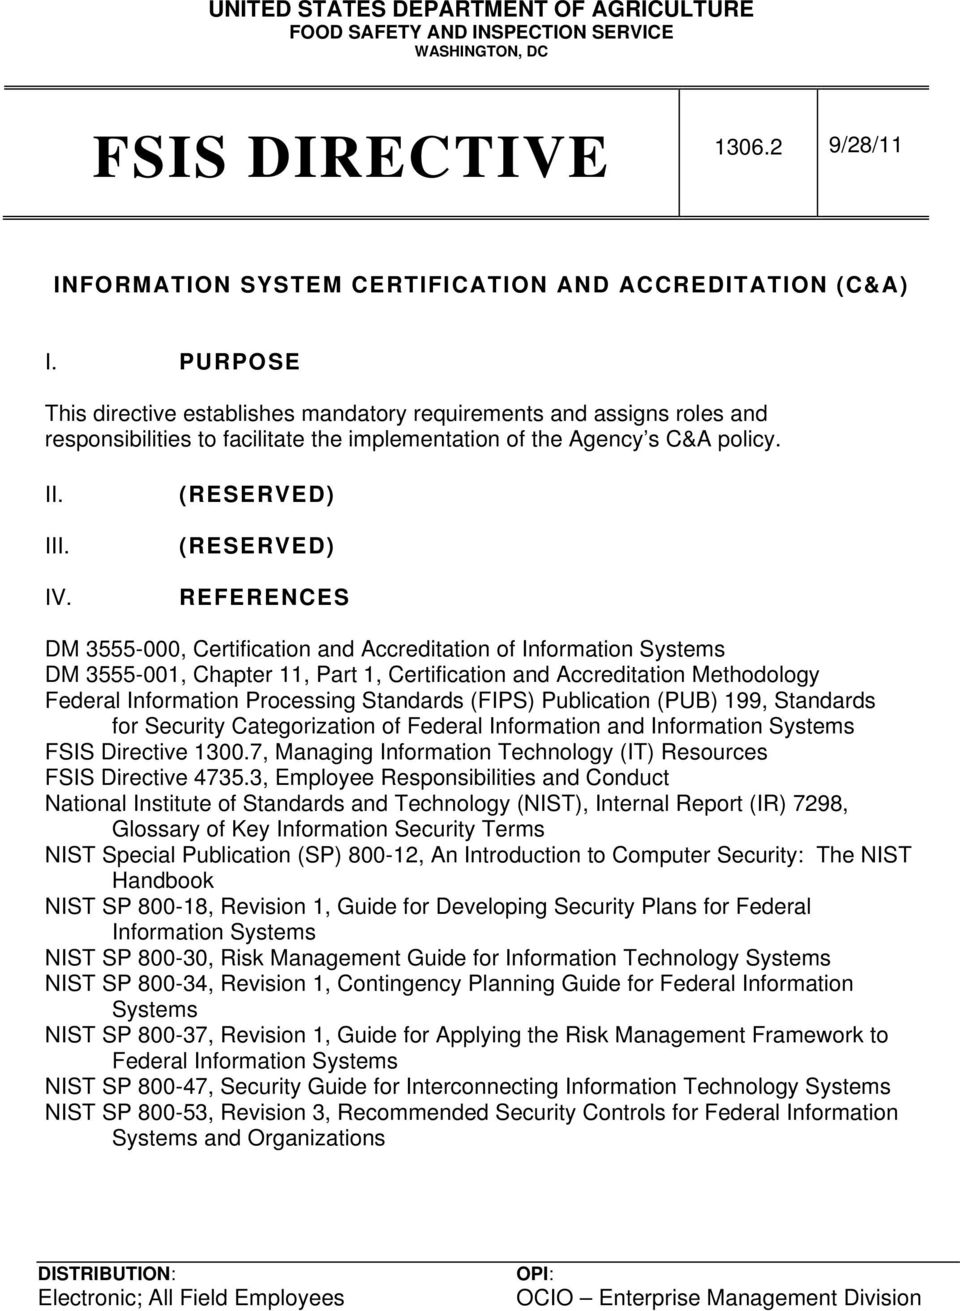 (RESERVED) (RESERVED) REFERENCES DM 3555-000, Certification and Accreditation of Information Systems DM 3555-001, Chapter 11, Part 1, Certification and Accreditation Methodology Federal Information